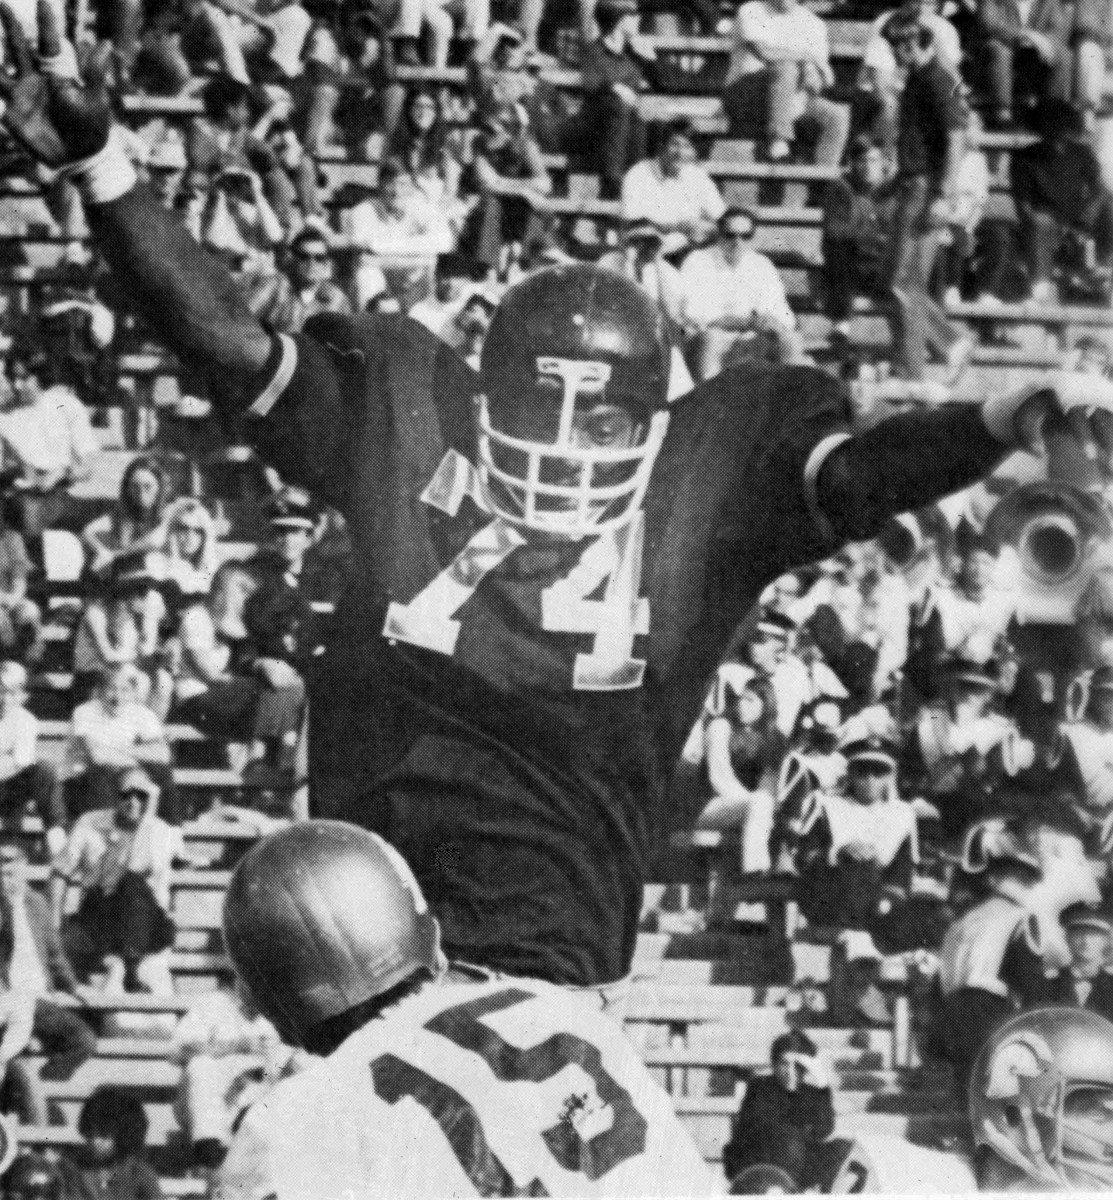 Sherman White was the No. 2 pick in the 1972 NFL draft